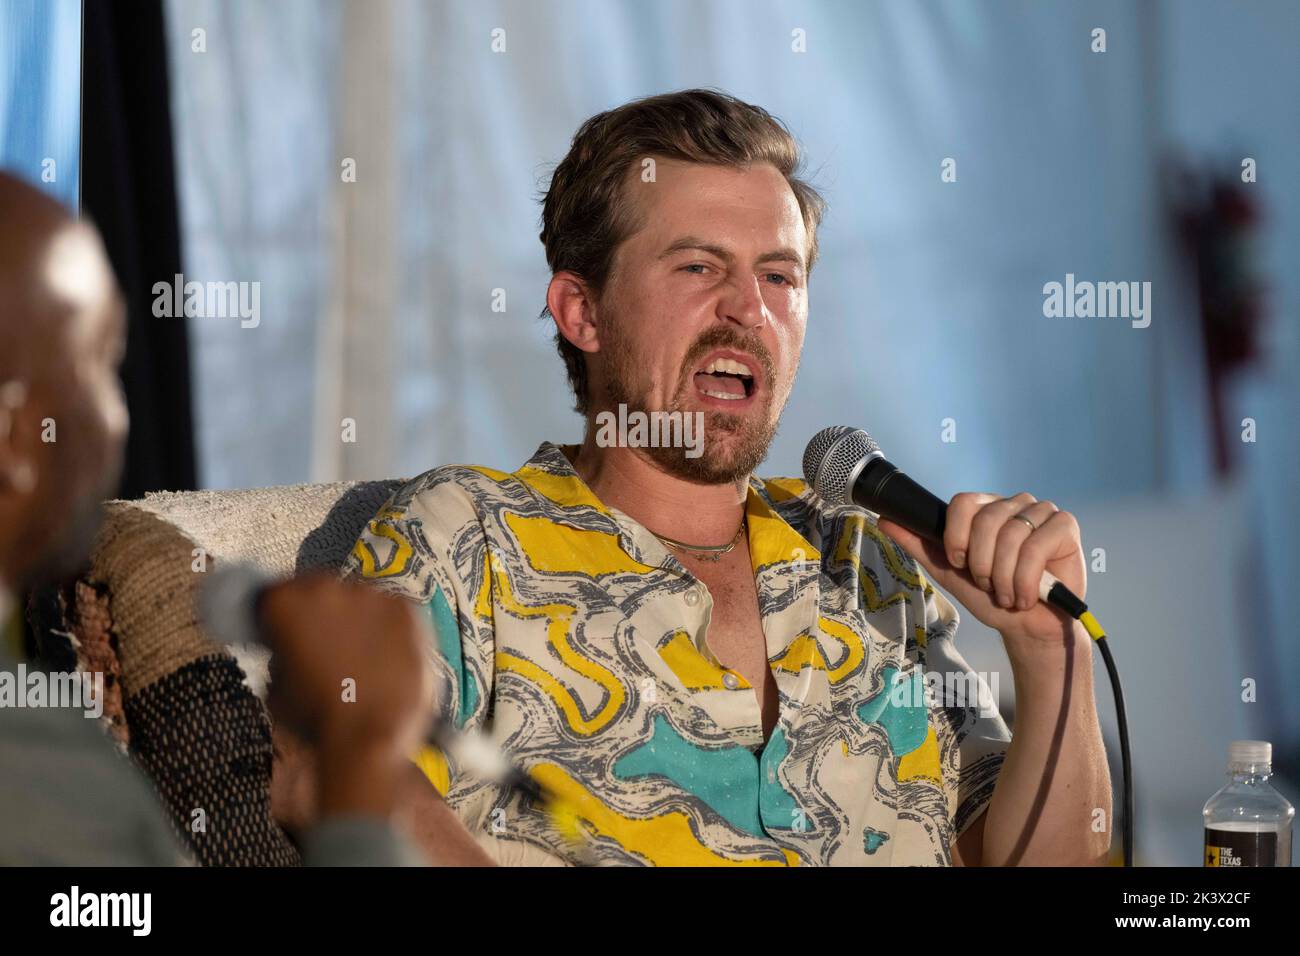 'Saturday Night Live' cast member ALEX MOFFAT during an interview session at the annual Texas Tribune Festival in downtown Austin on September 24, 2022. Stock Photo